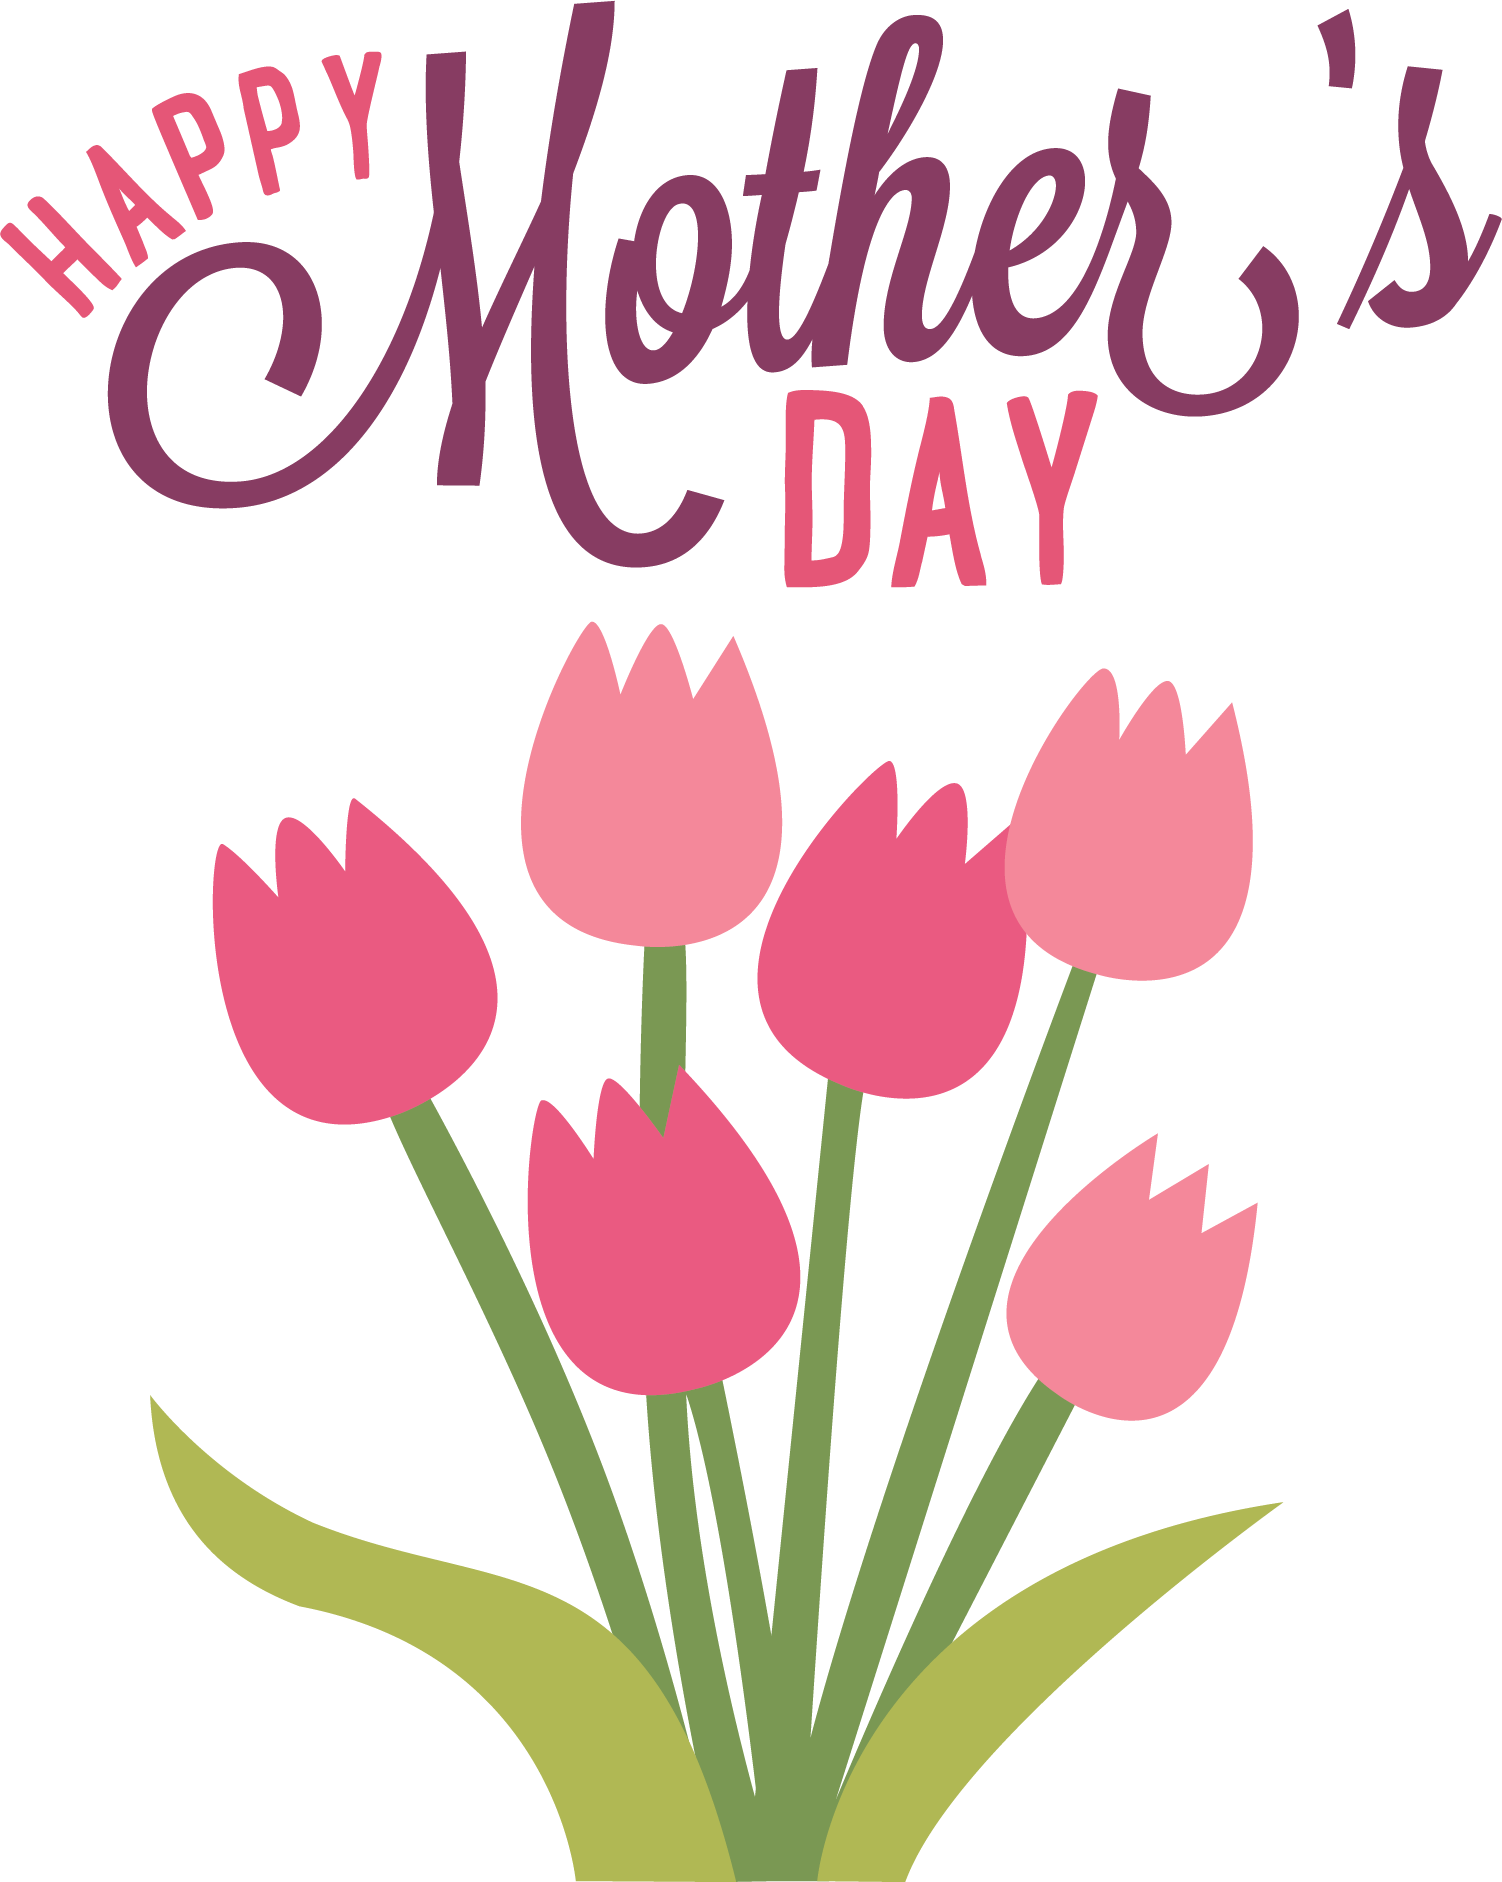 Today in Masonic History Poem for Mother's Day!